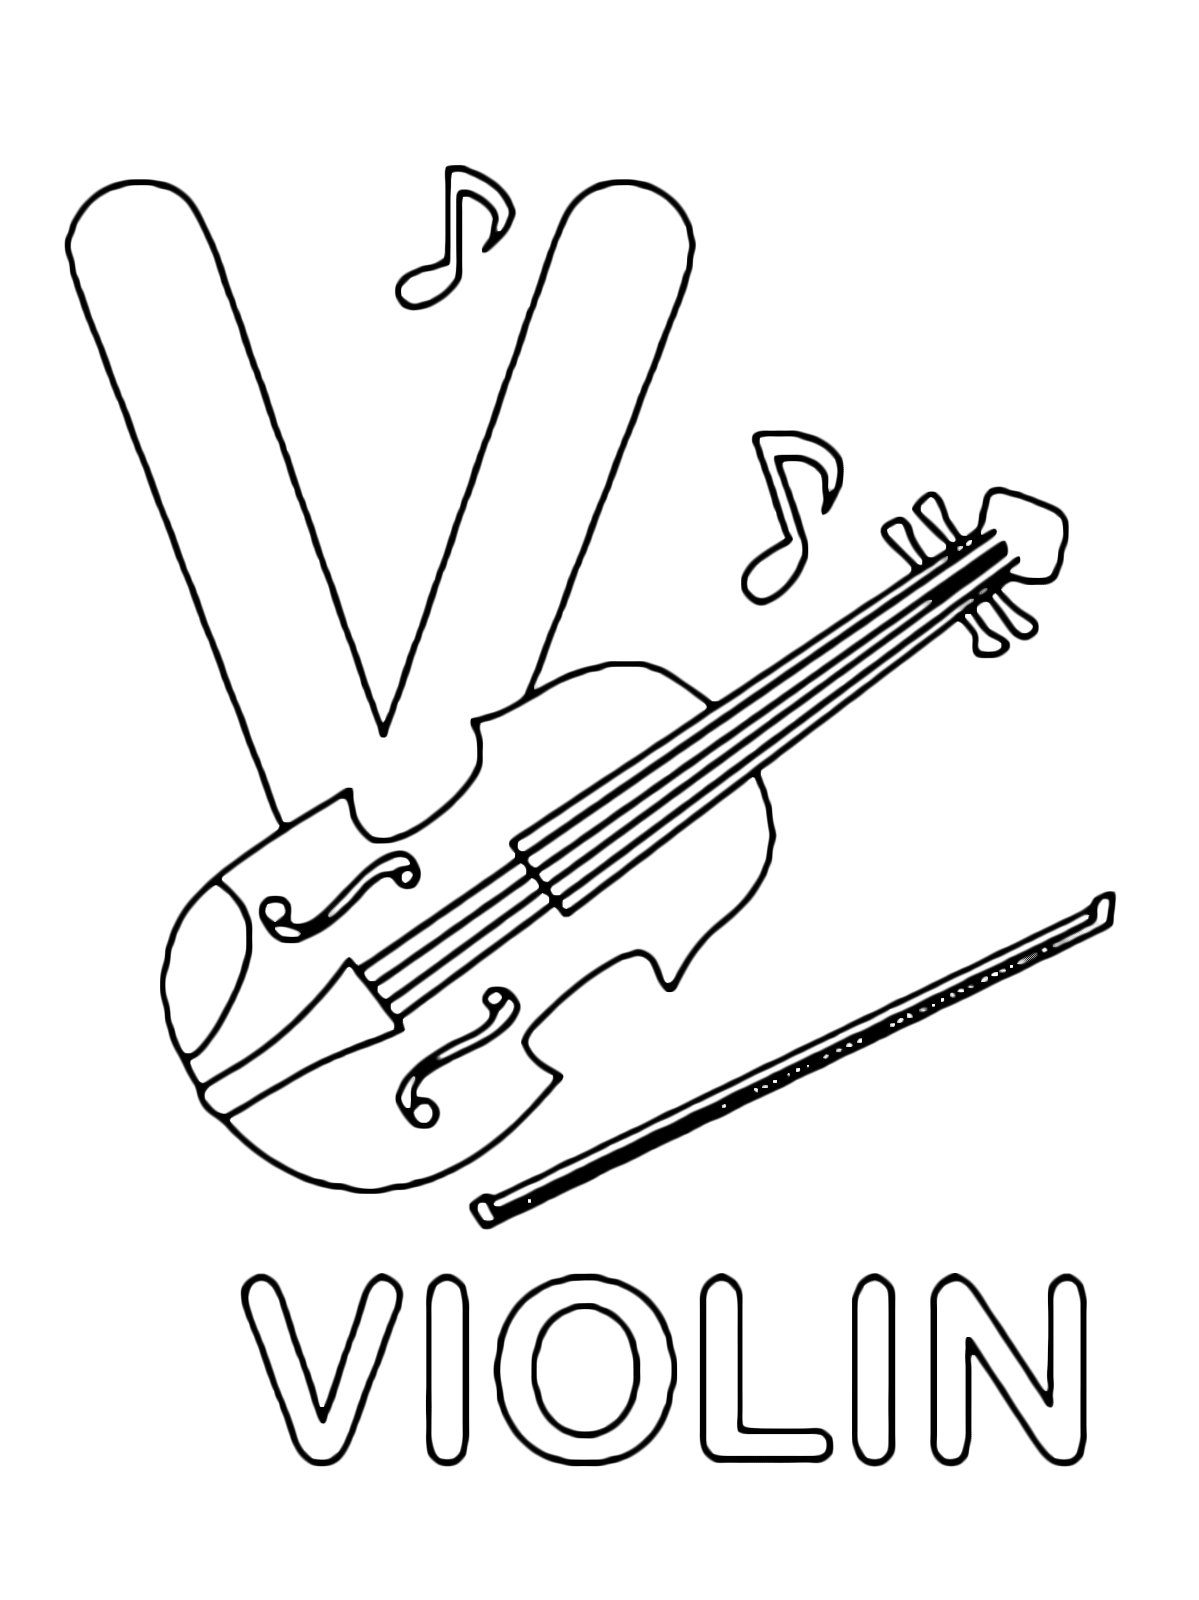 Letters and numbers - V for violin uppercase letter